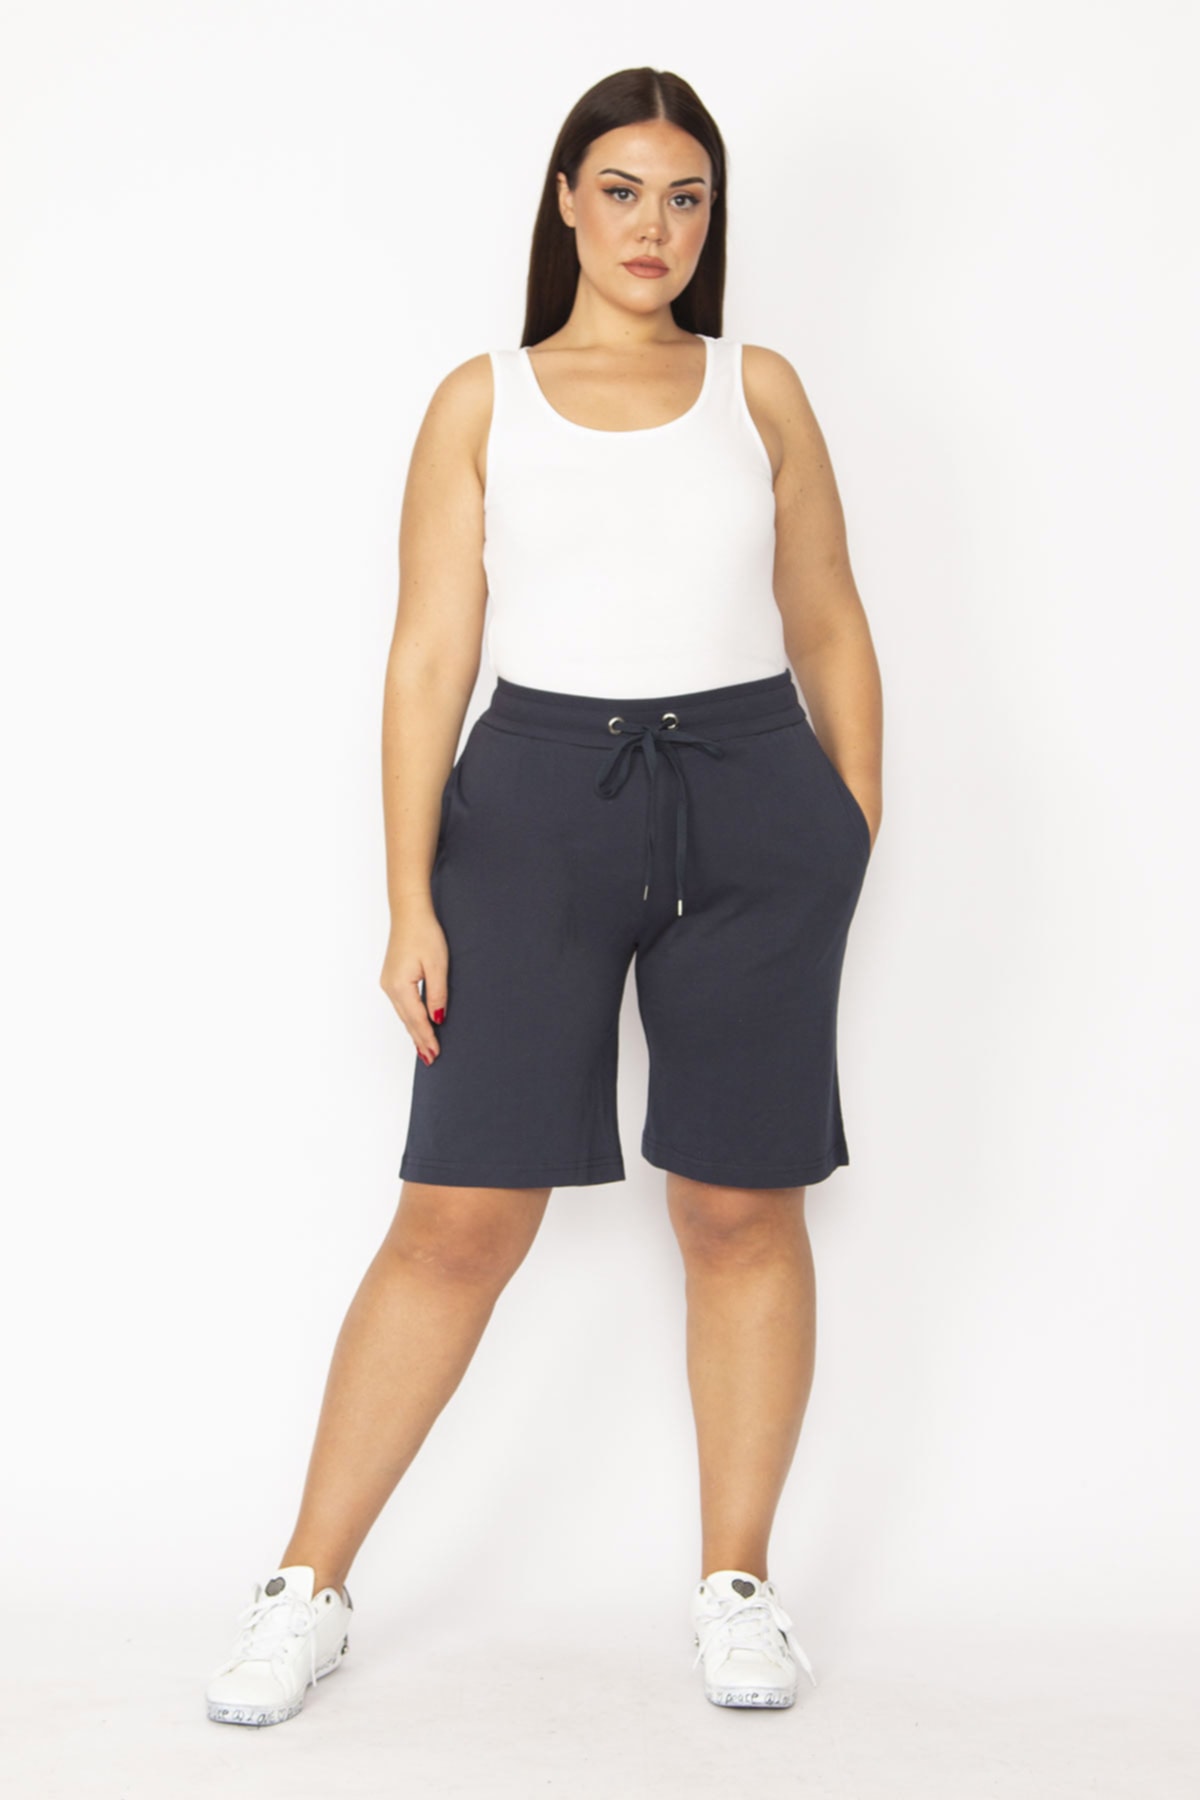 Şans Women's Plus Size Navy Blue Cotton Shorts With Elastic Waist And Eyelets, Lace-Up